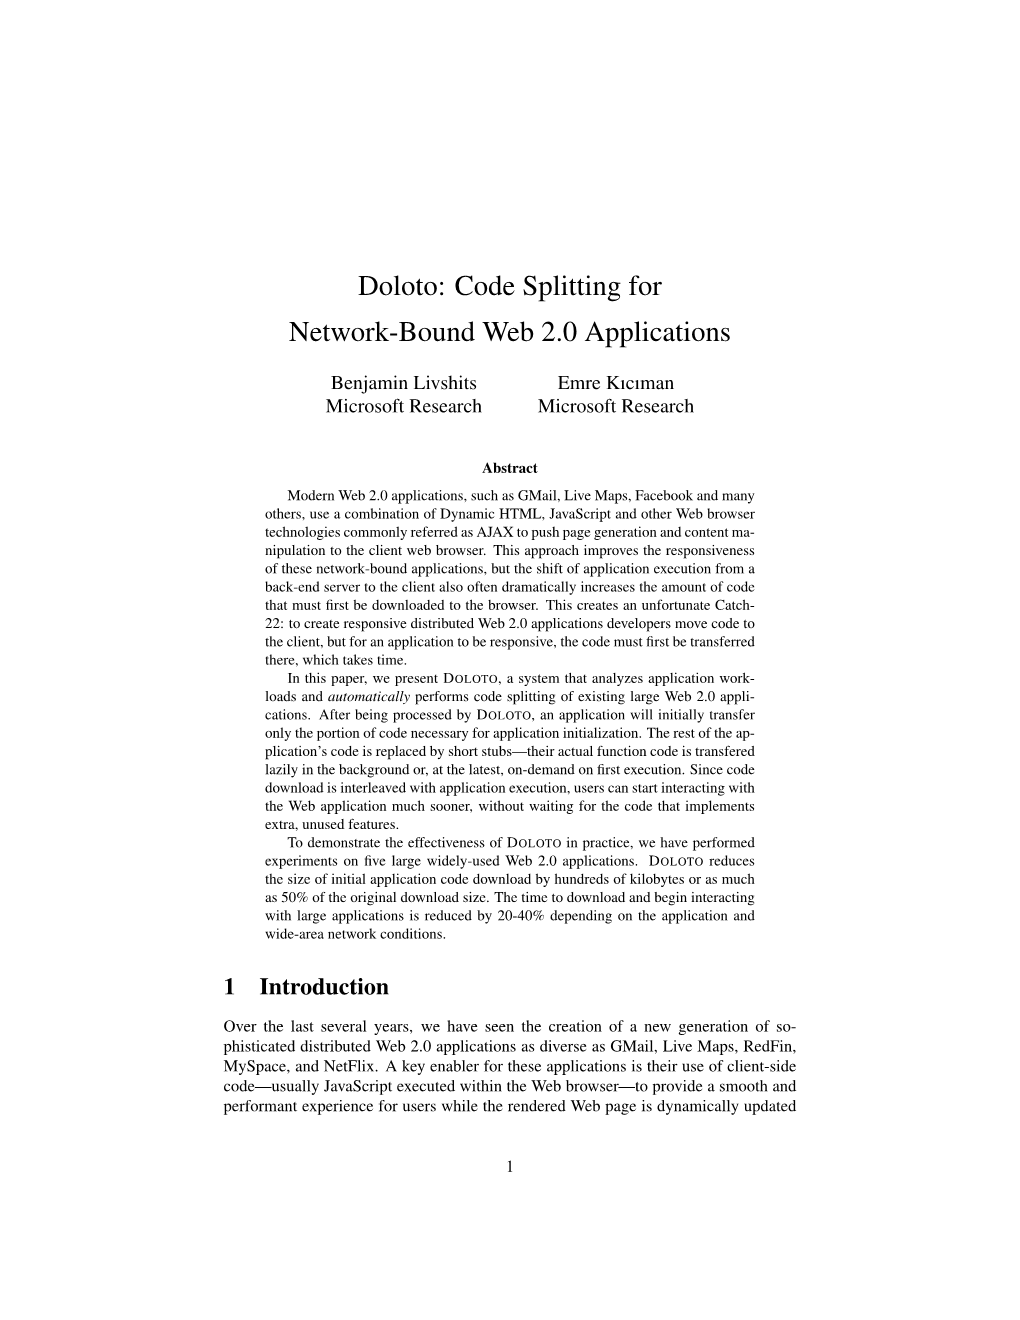 Doloto: Code Splitting for Network-Bound Web 2.0 Applications